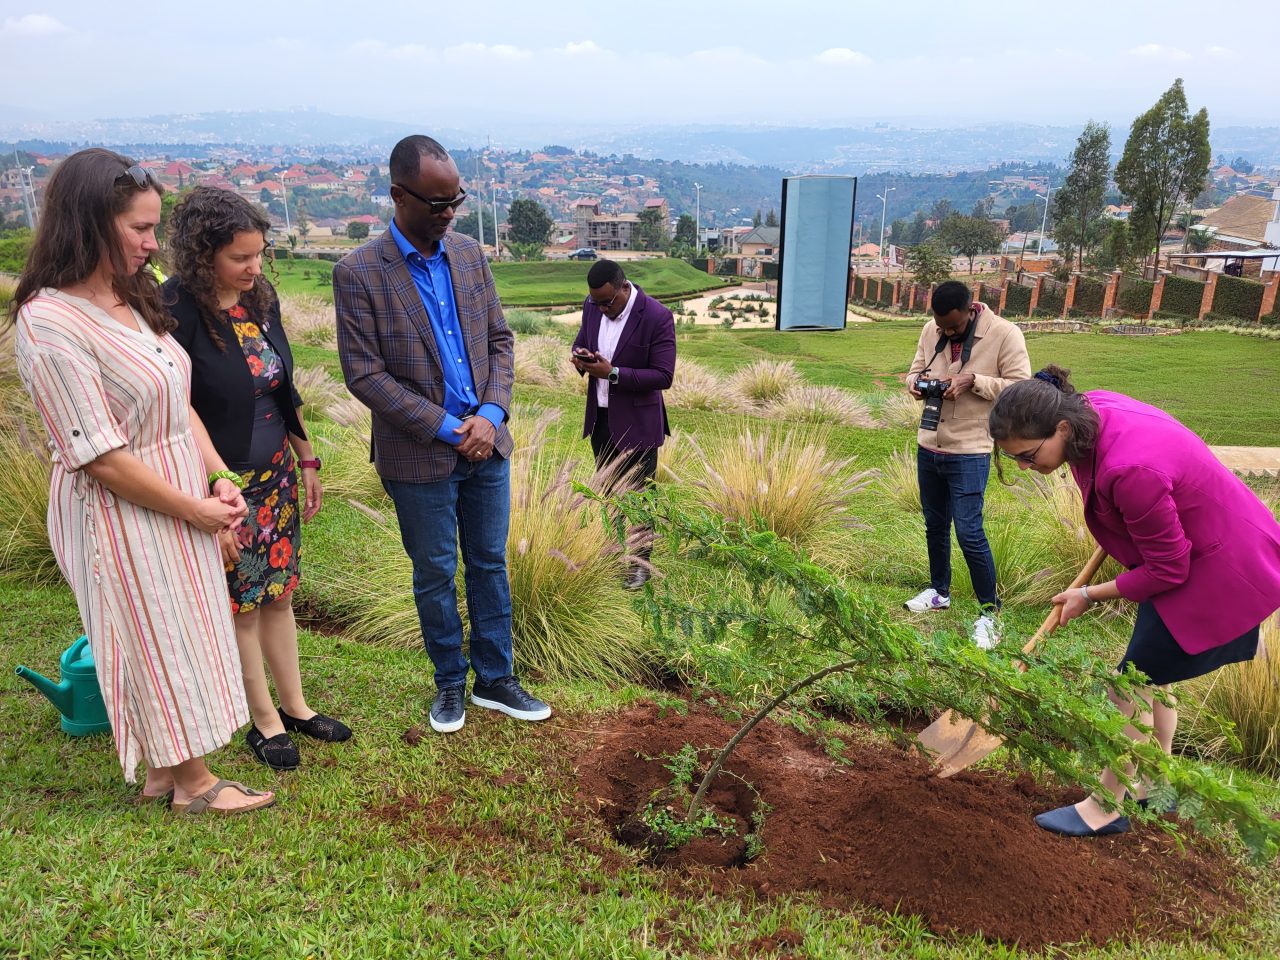 We had the honour and privilege of planting a tree in the Garden of Memory